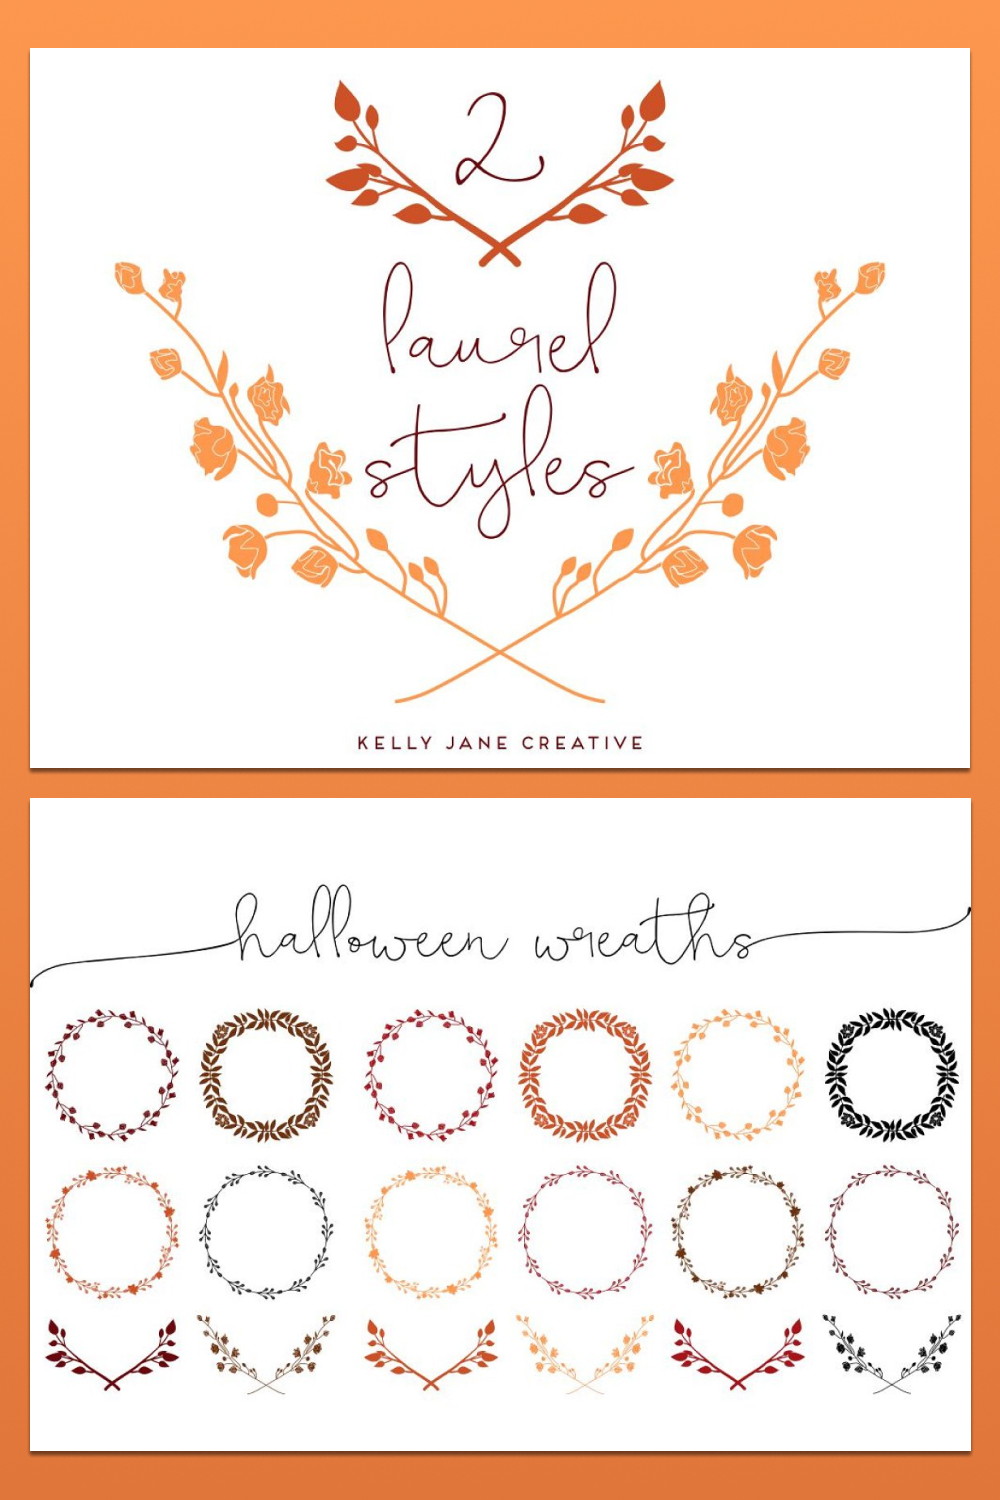 A great font and style for fall-themed decorations.